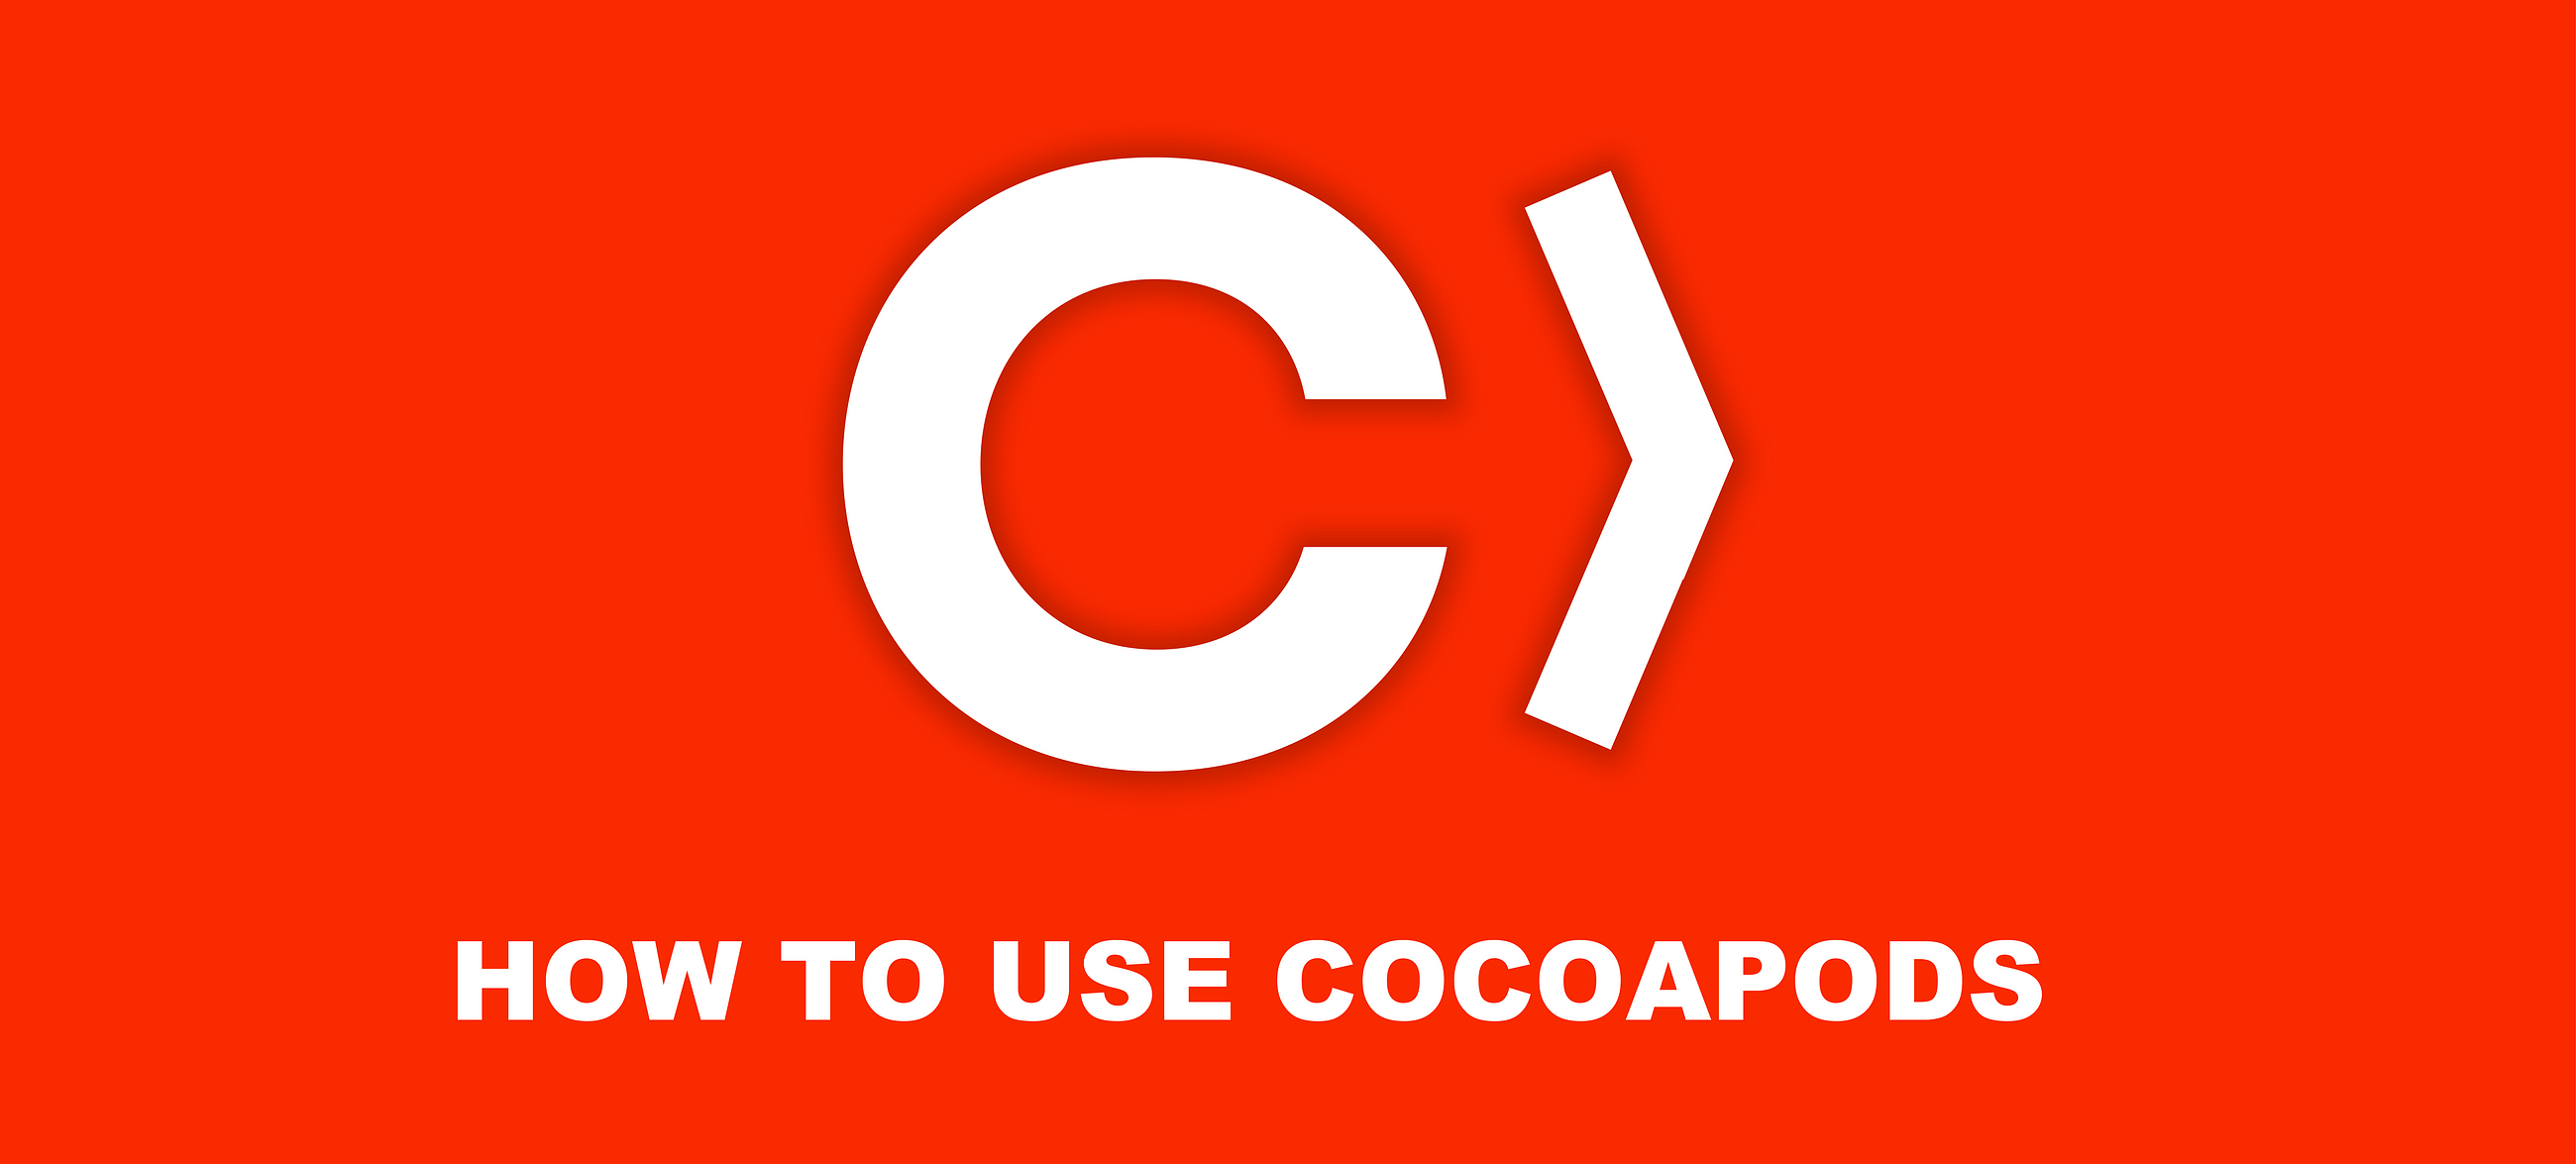 update cocoapods version ios